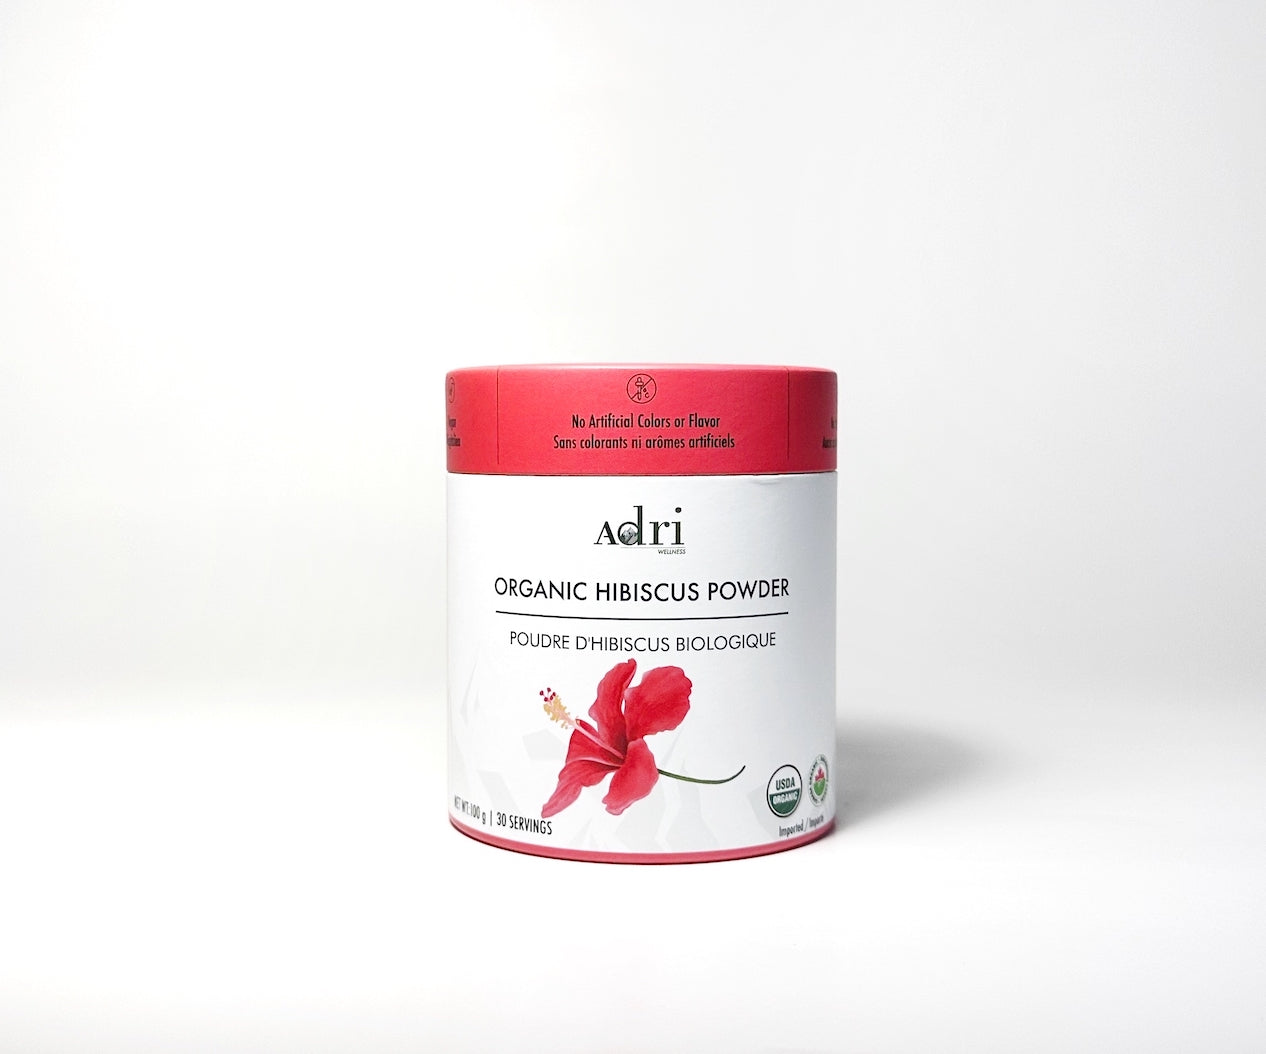 a 100gm sustainable paper tube container of Adri Wellness' organic Hibiscus powder against a white background